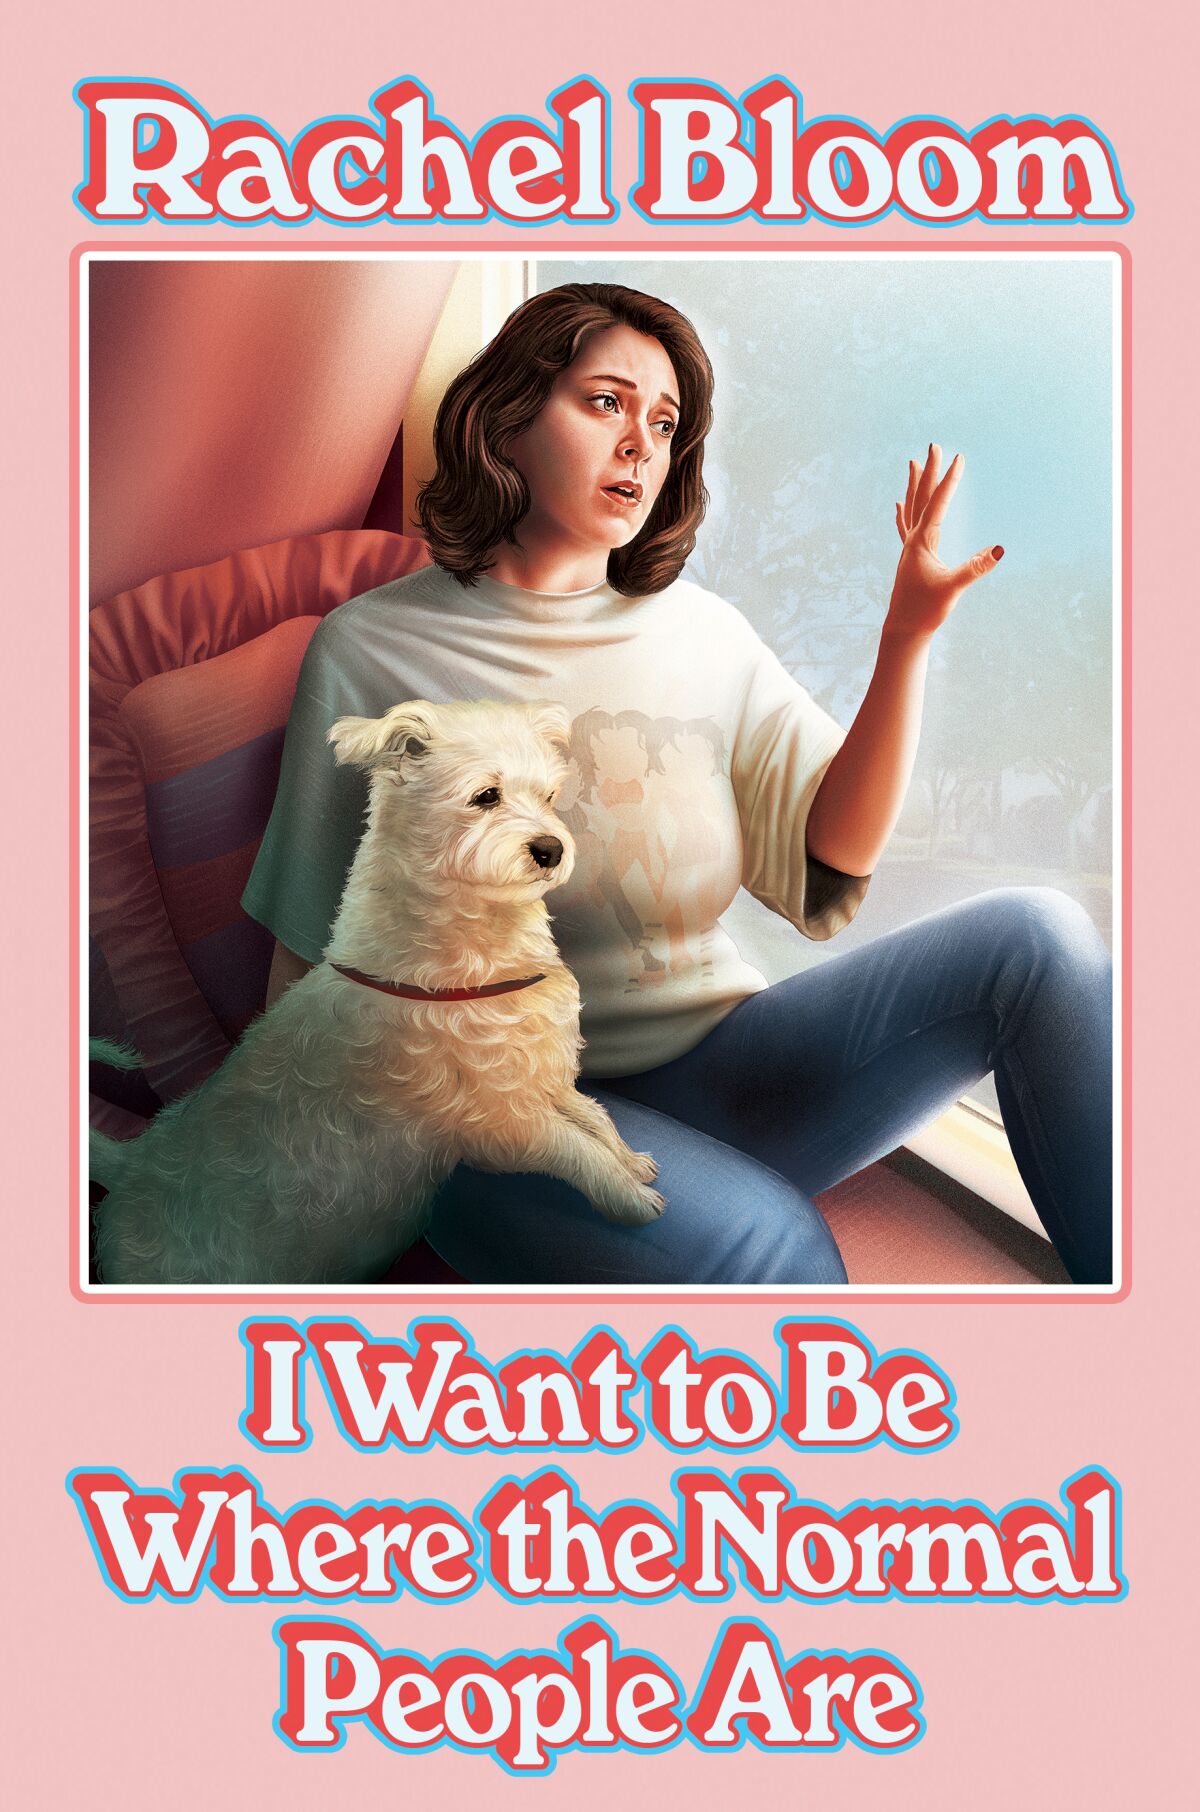 Book jacket for "I Want to Be Where the Normal People Are" by Rachel Bloom.